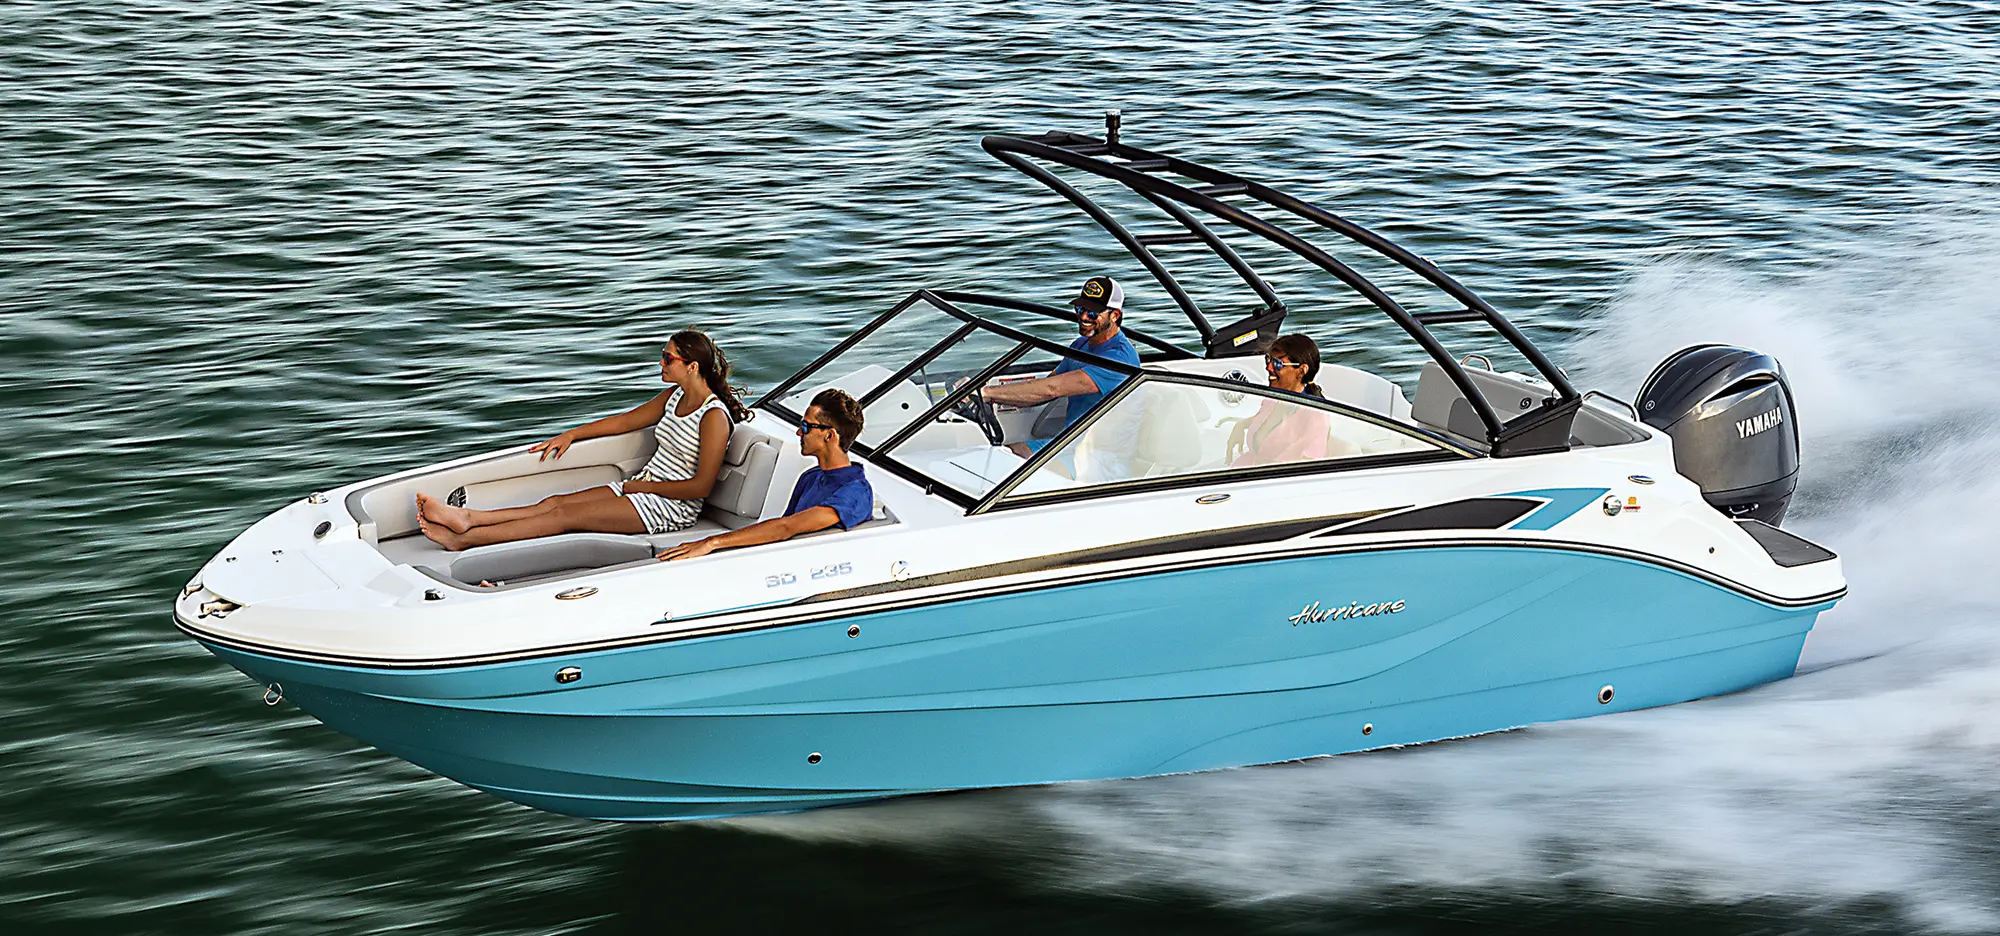 Aerial angle photo view of a man, woman, a younger girl, and younger boy sitting nearby each other inside the Hurricane SunDeck 235 pontoon motorboat vehicle as all of them are smiling in beach attire and sunglasses as the man in the hat is driving